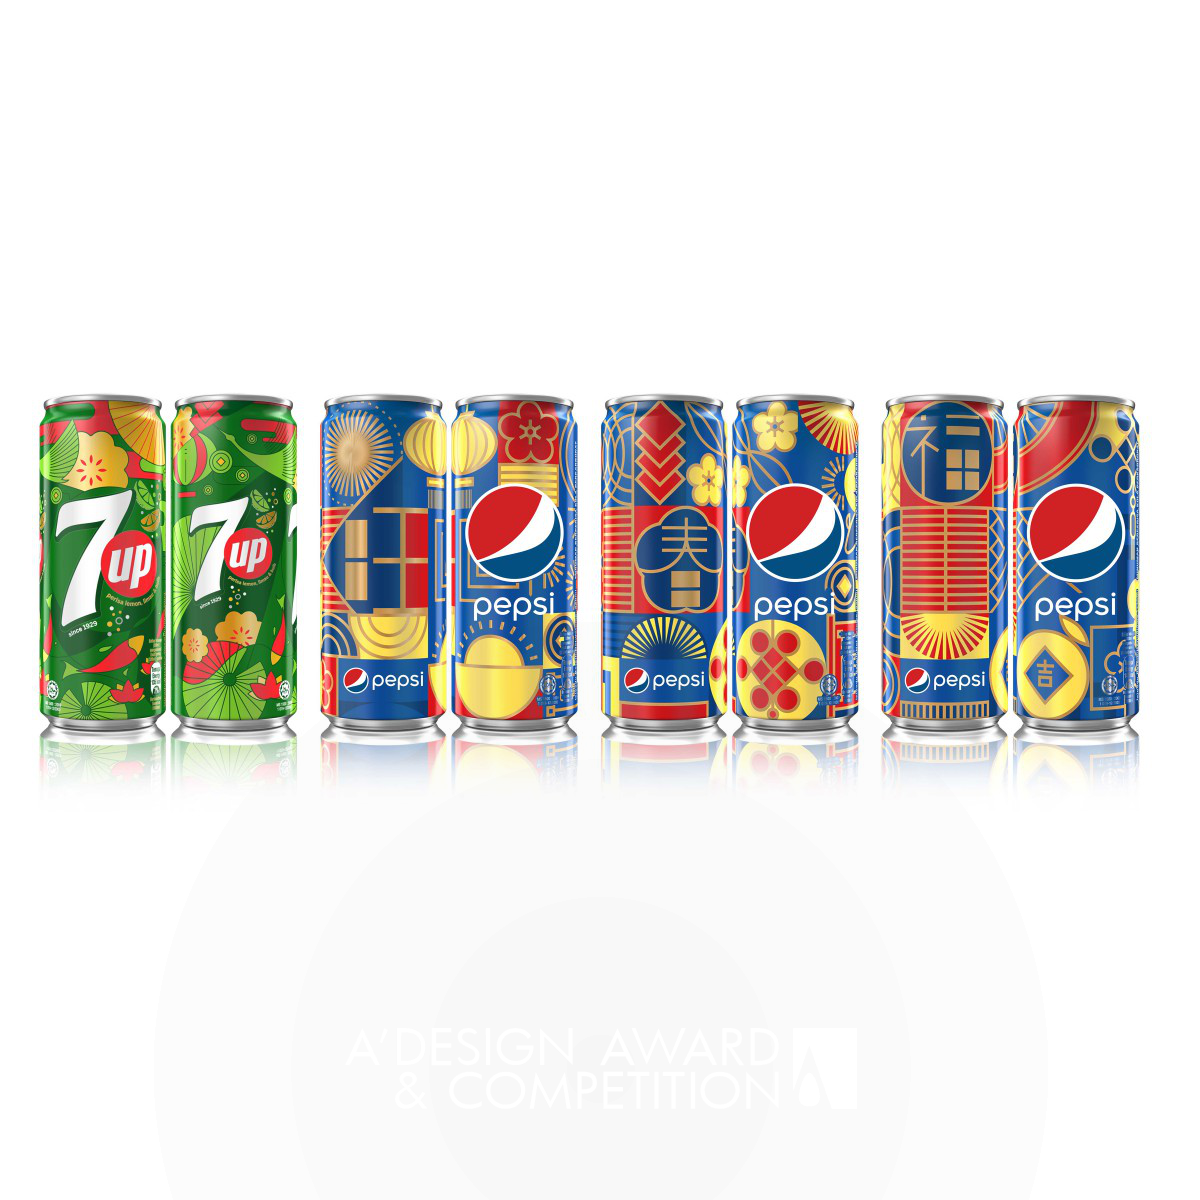 Pepsi x 7Up Chinese New Year LTO Cans Brand Packaging by PepsiCo Design and Innovation